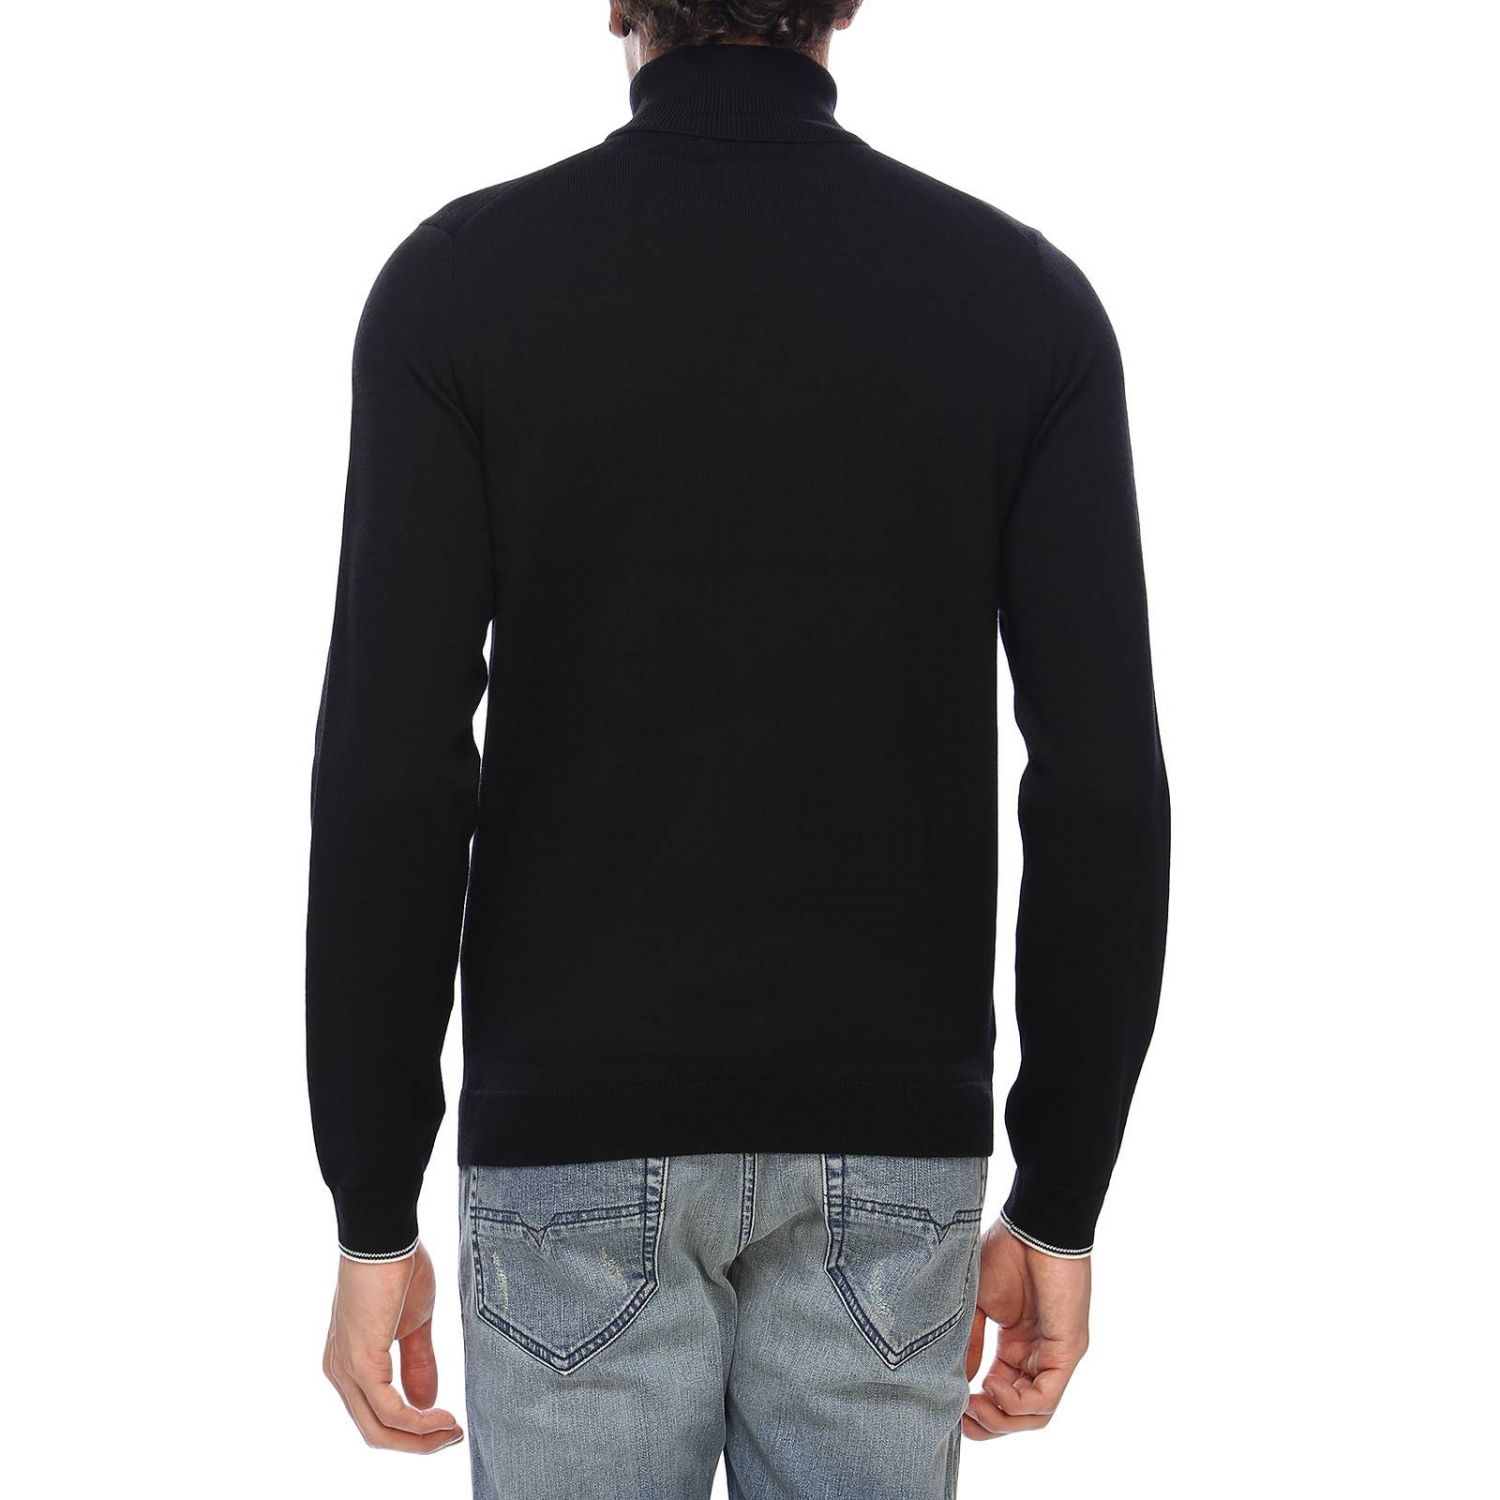 Fred Perry Outlet: Sweater men | Sweater Fred Perry Men Black | Sweater ...